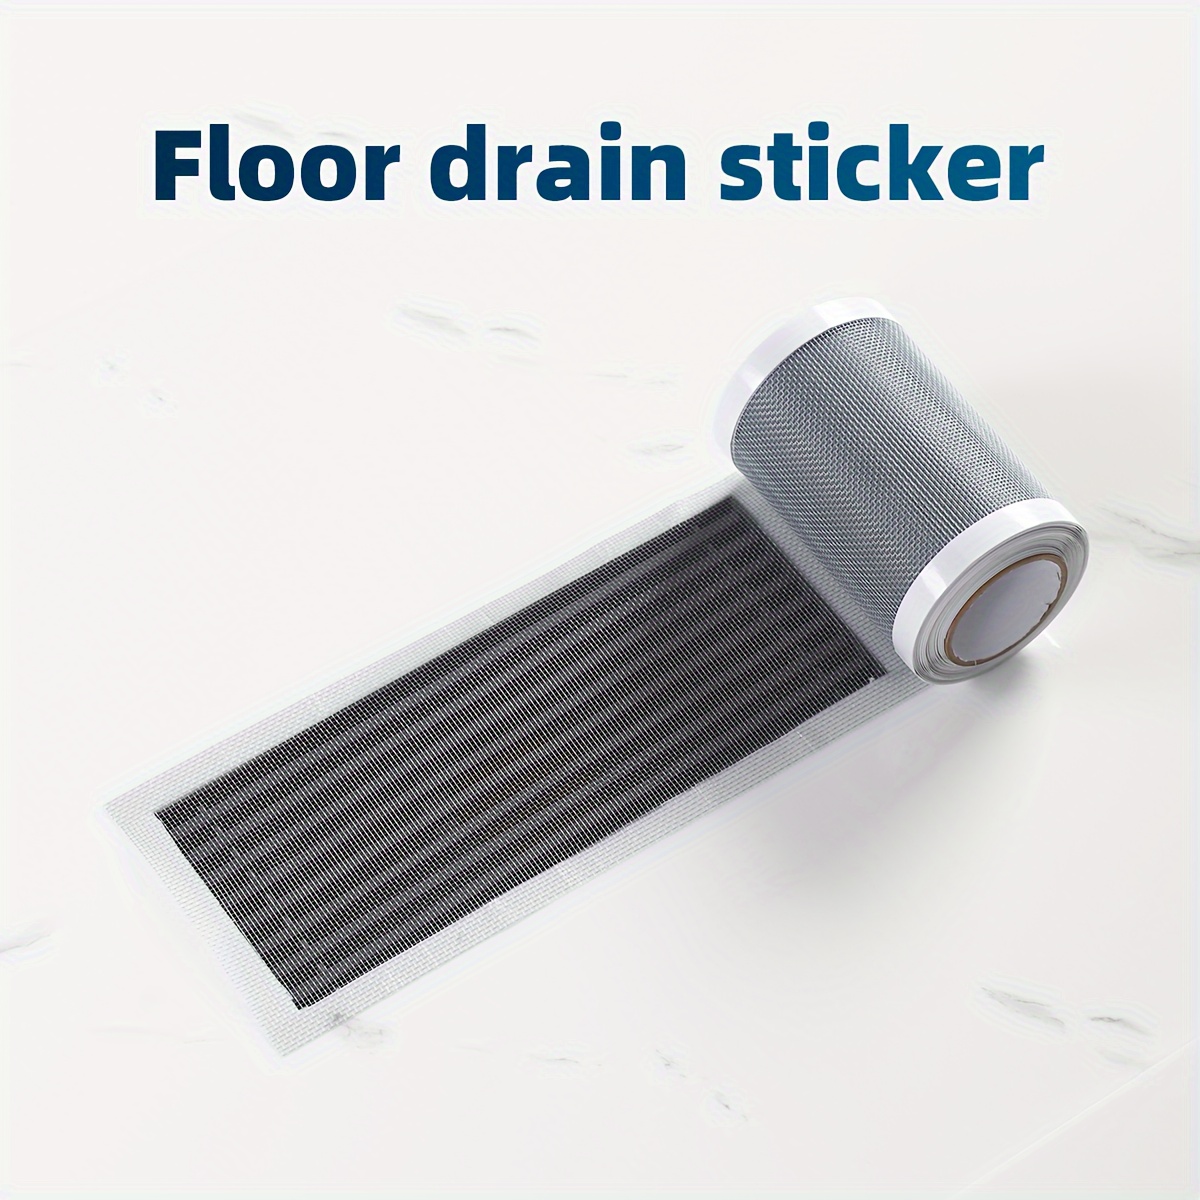 

Disposable Floor Drain Sticker Filter Mesh With Double-sided Adhesive, 5m Roll Length, Plastic Material, Easy To Cut, Insect And Hair Blockage Preventer For Bathroom Drains, No Electricity Required.